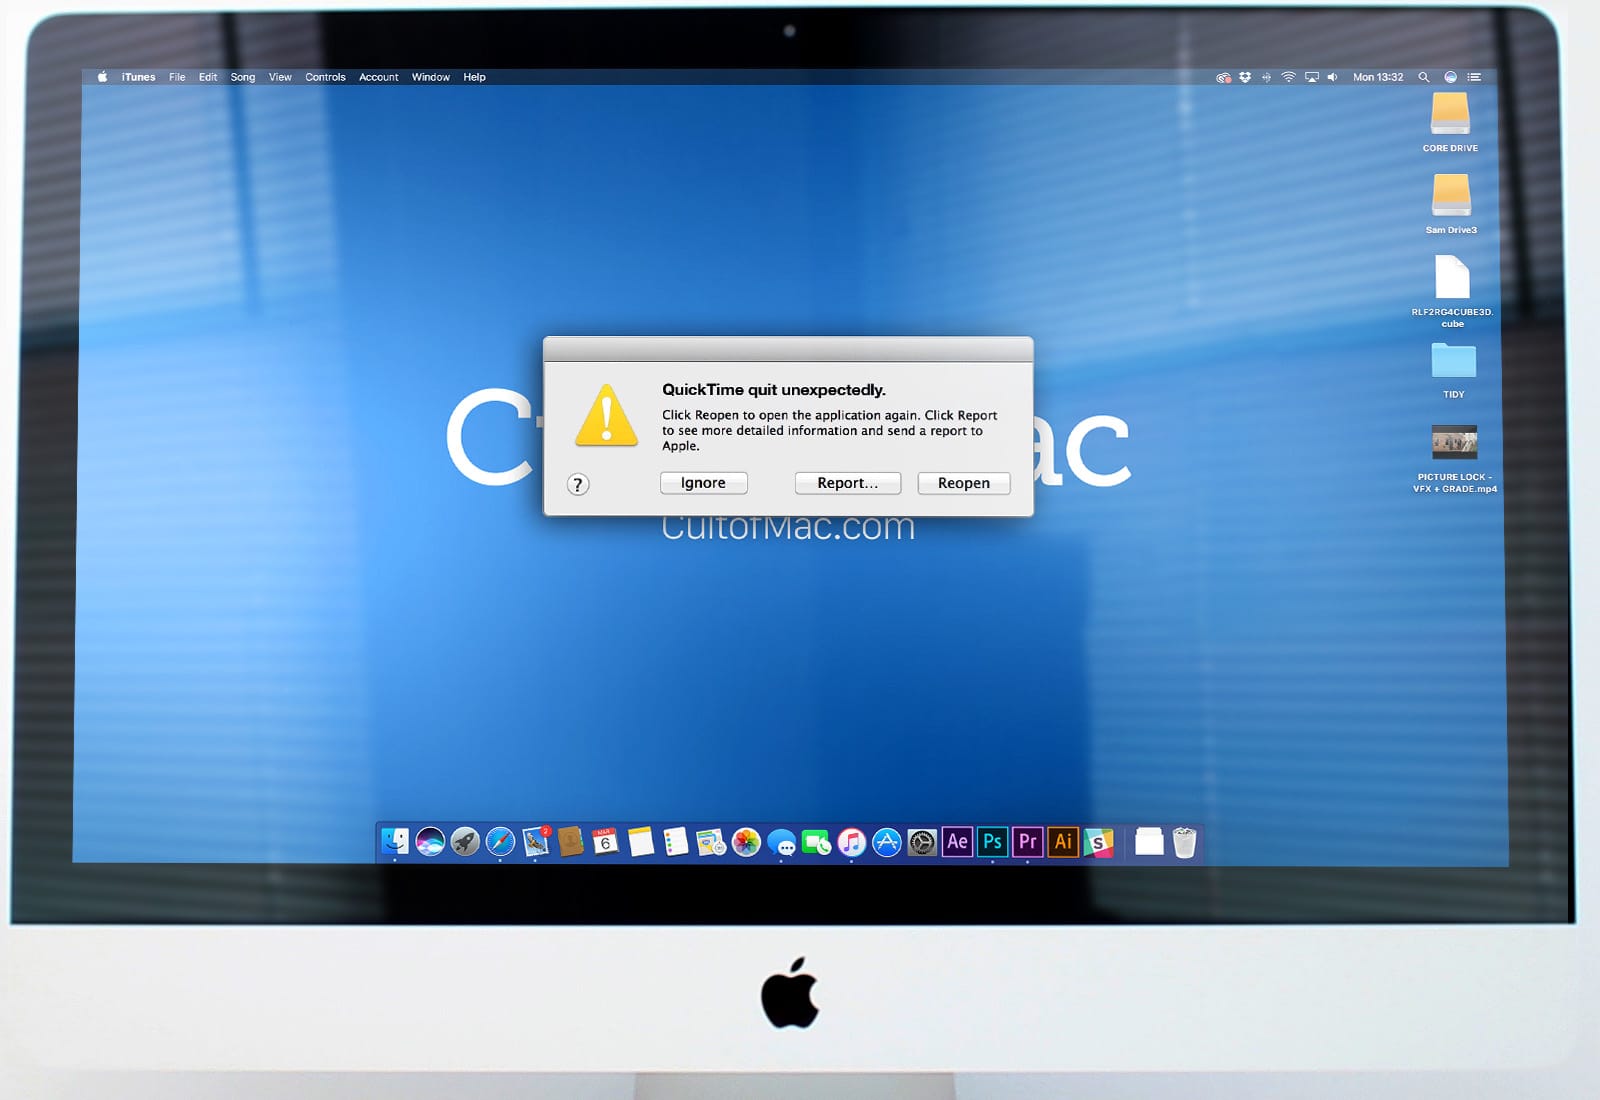 If you lost an audio file due to the dreaded QuickTime crash, this tip could save the day.